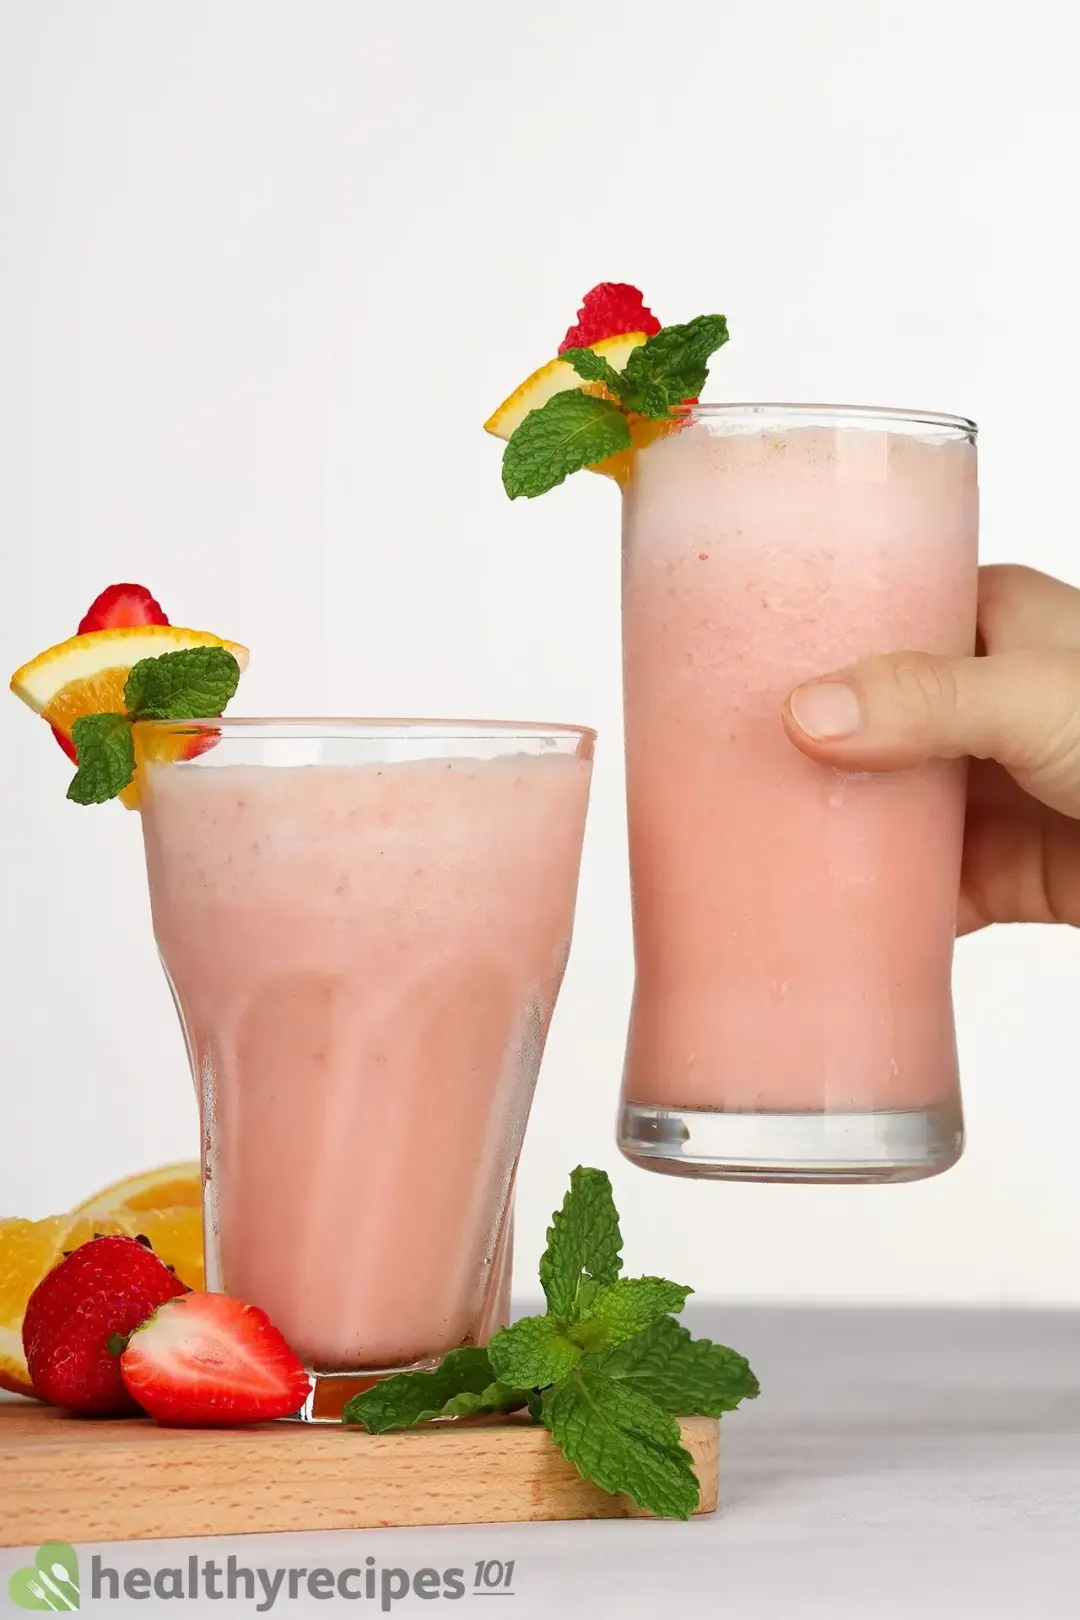 Can You Make Strawberry orange Smoothie the Night Before